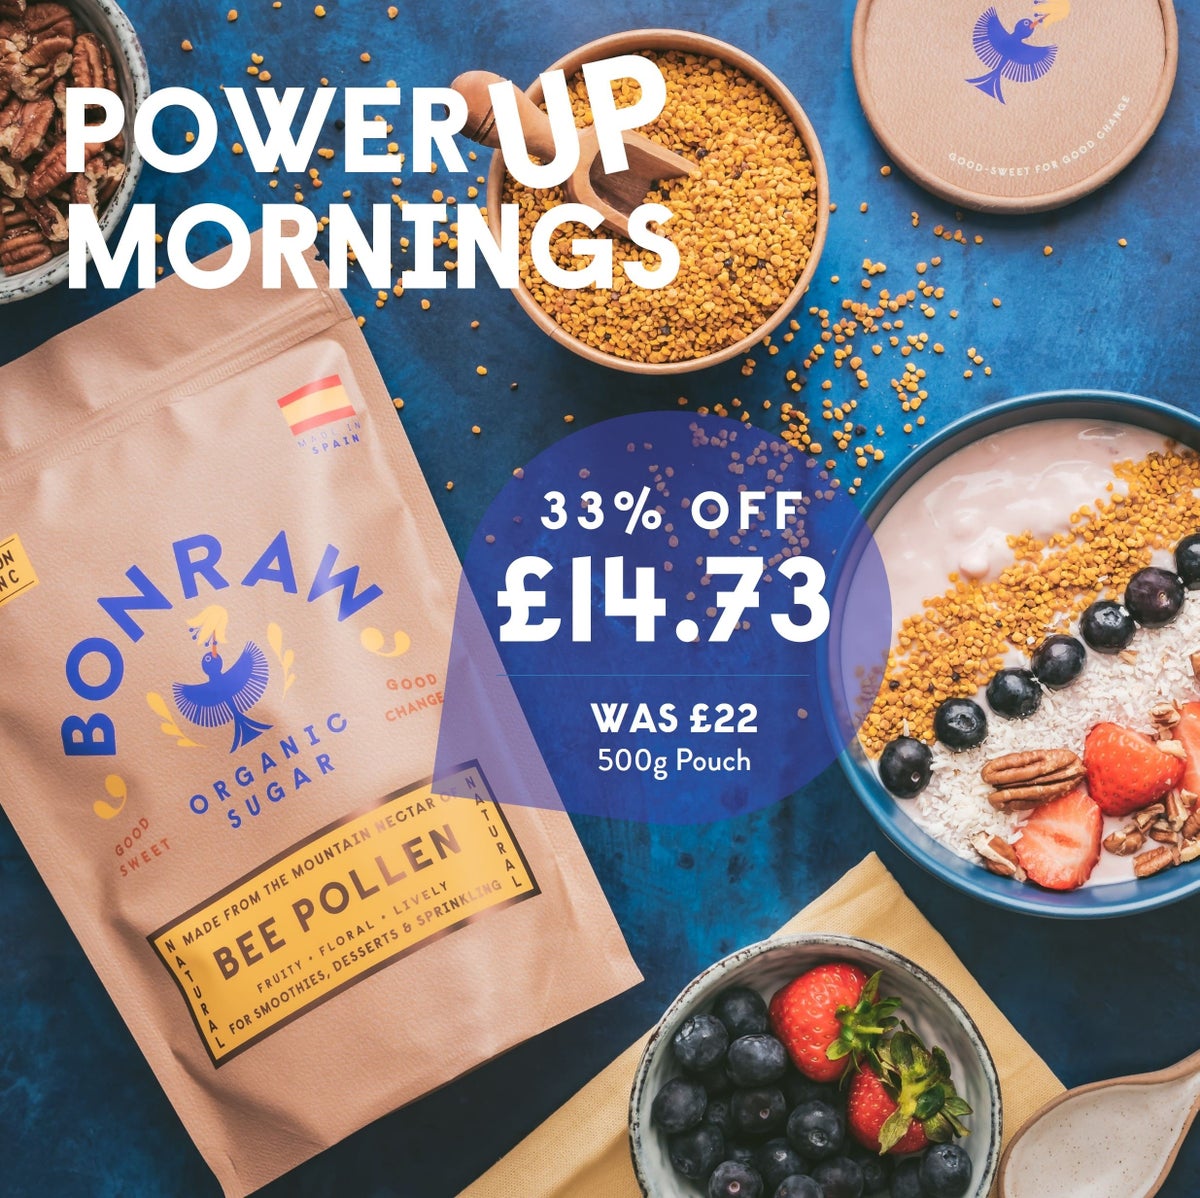 Power up mornings. 33% off Bee Pollen, was £22 now £14.73. (500g pouch)